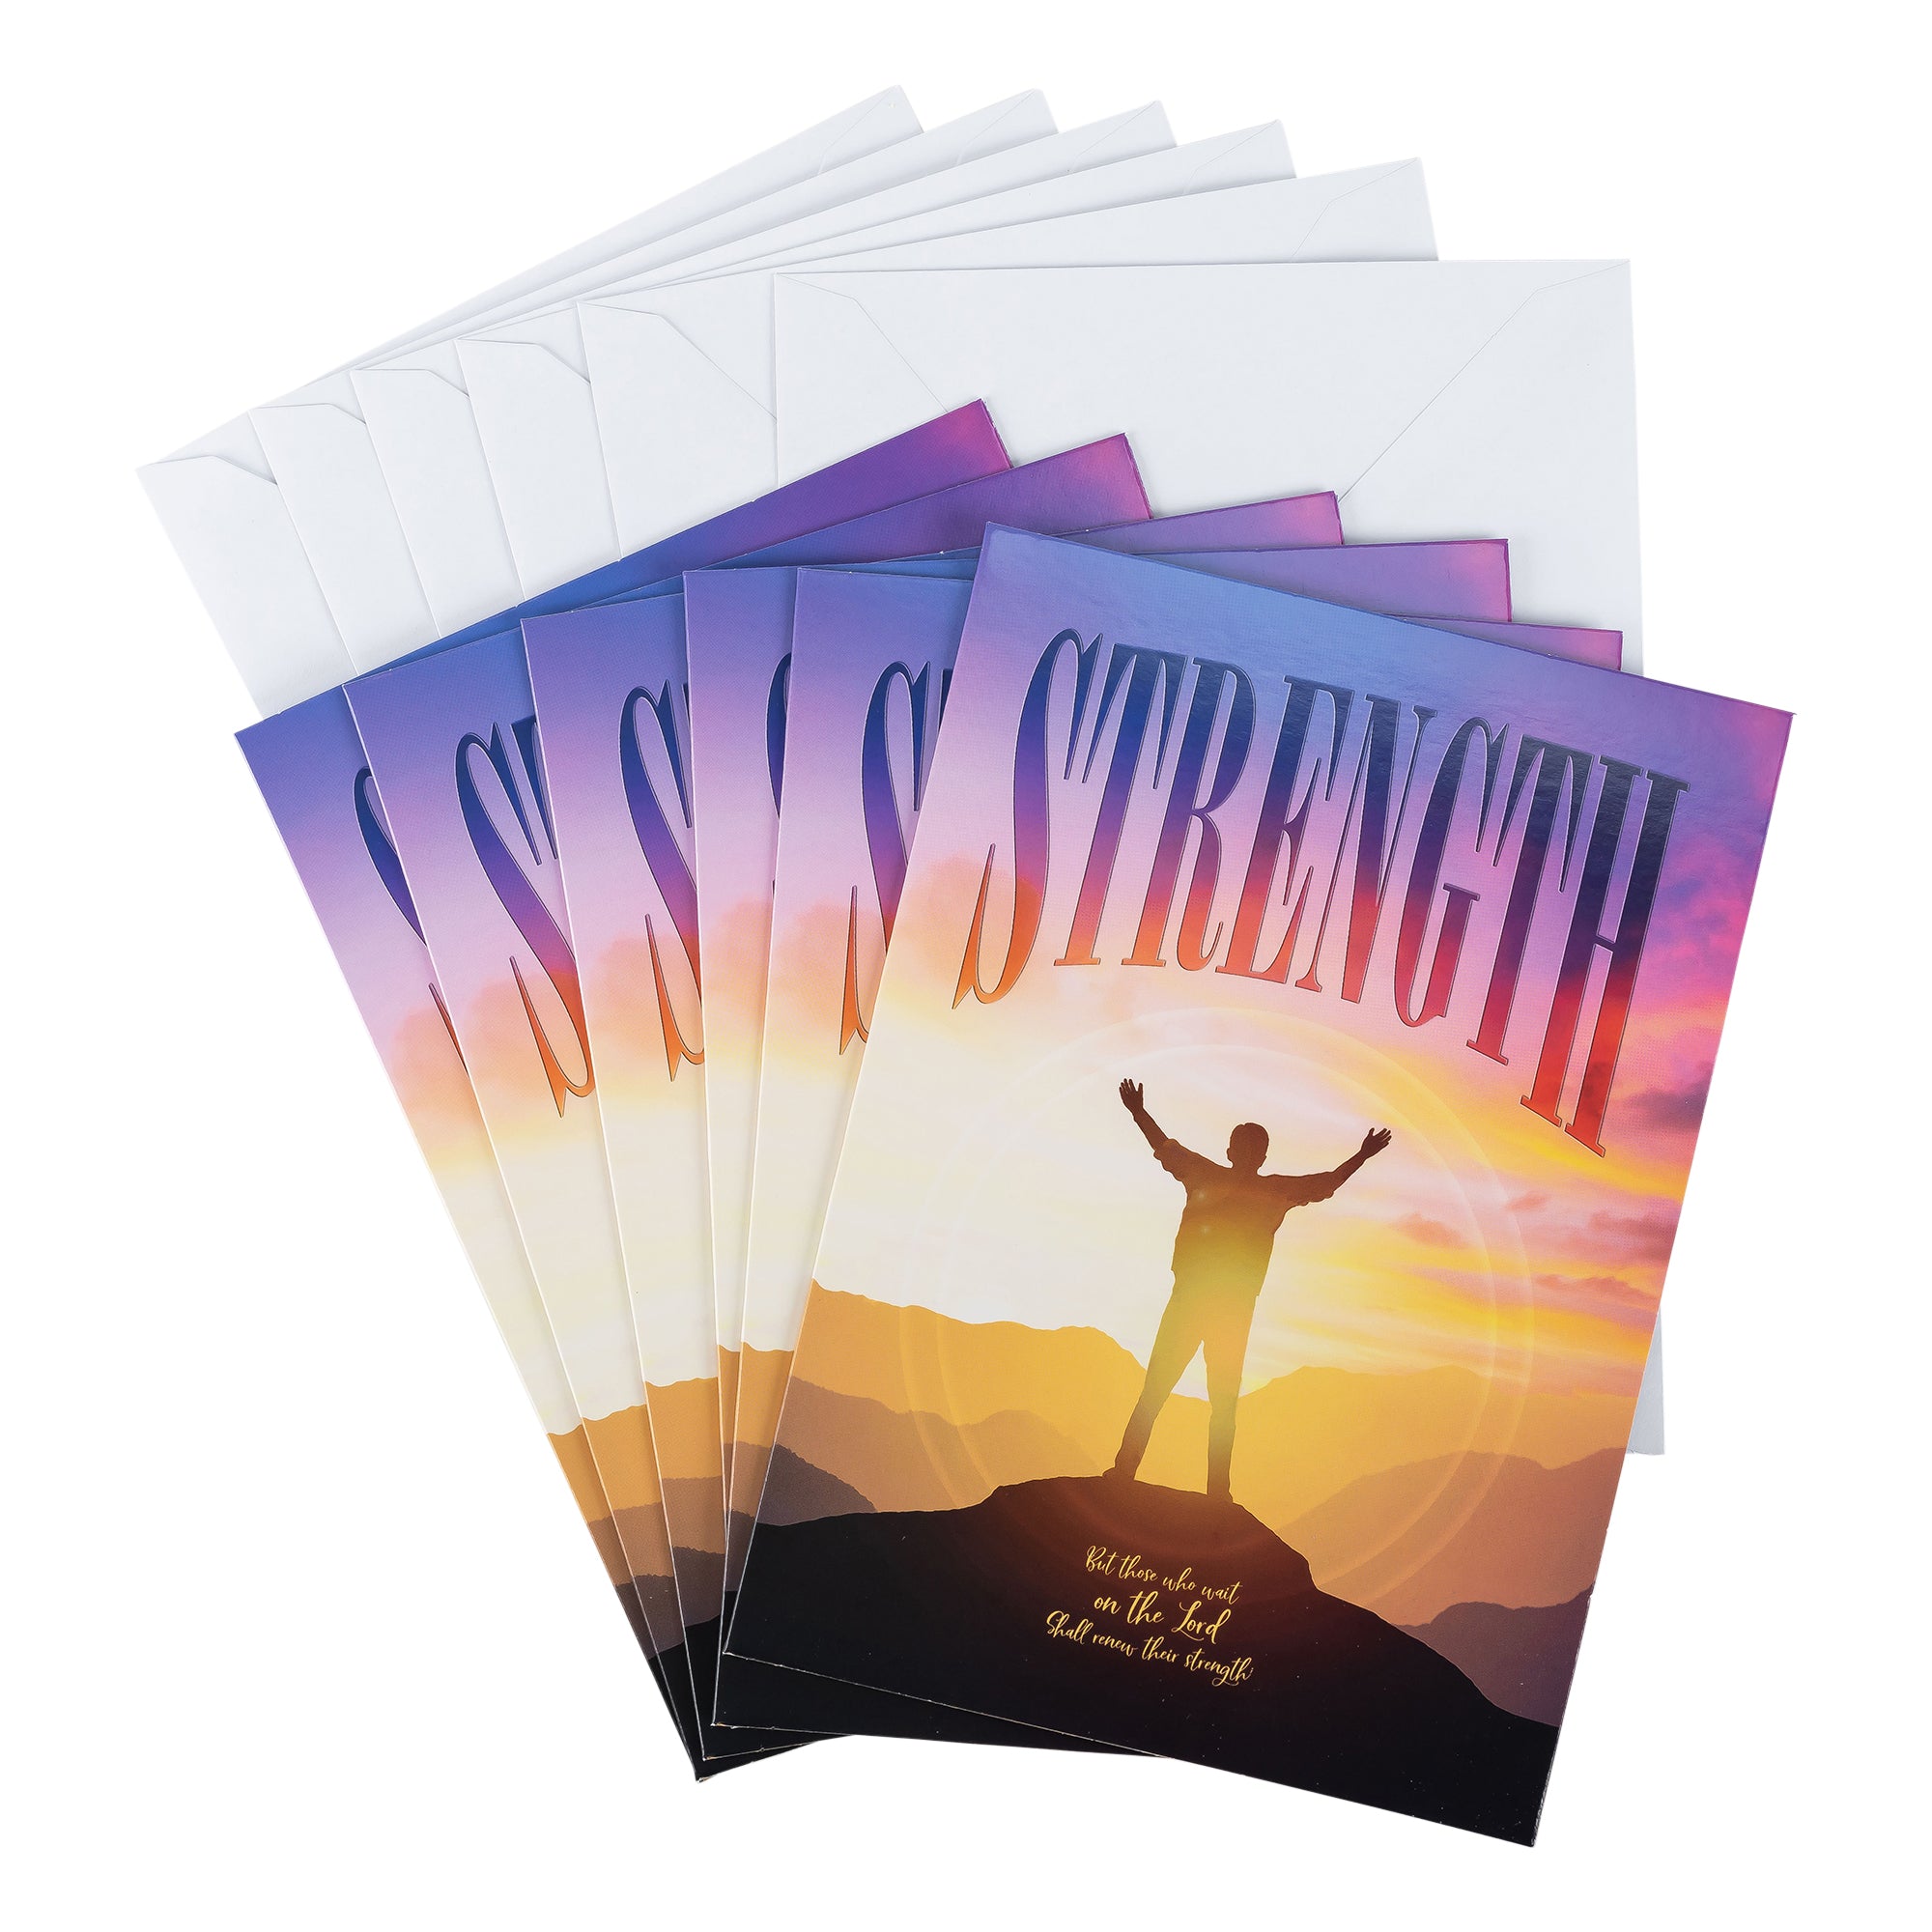 Single Cards: Inspiration, God is Our Strength (Set of 6)